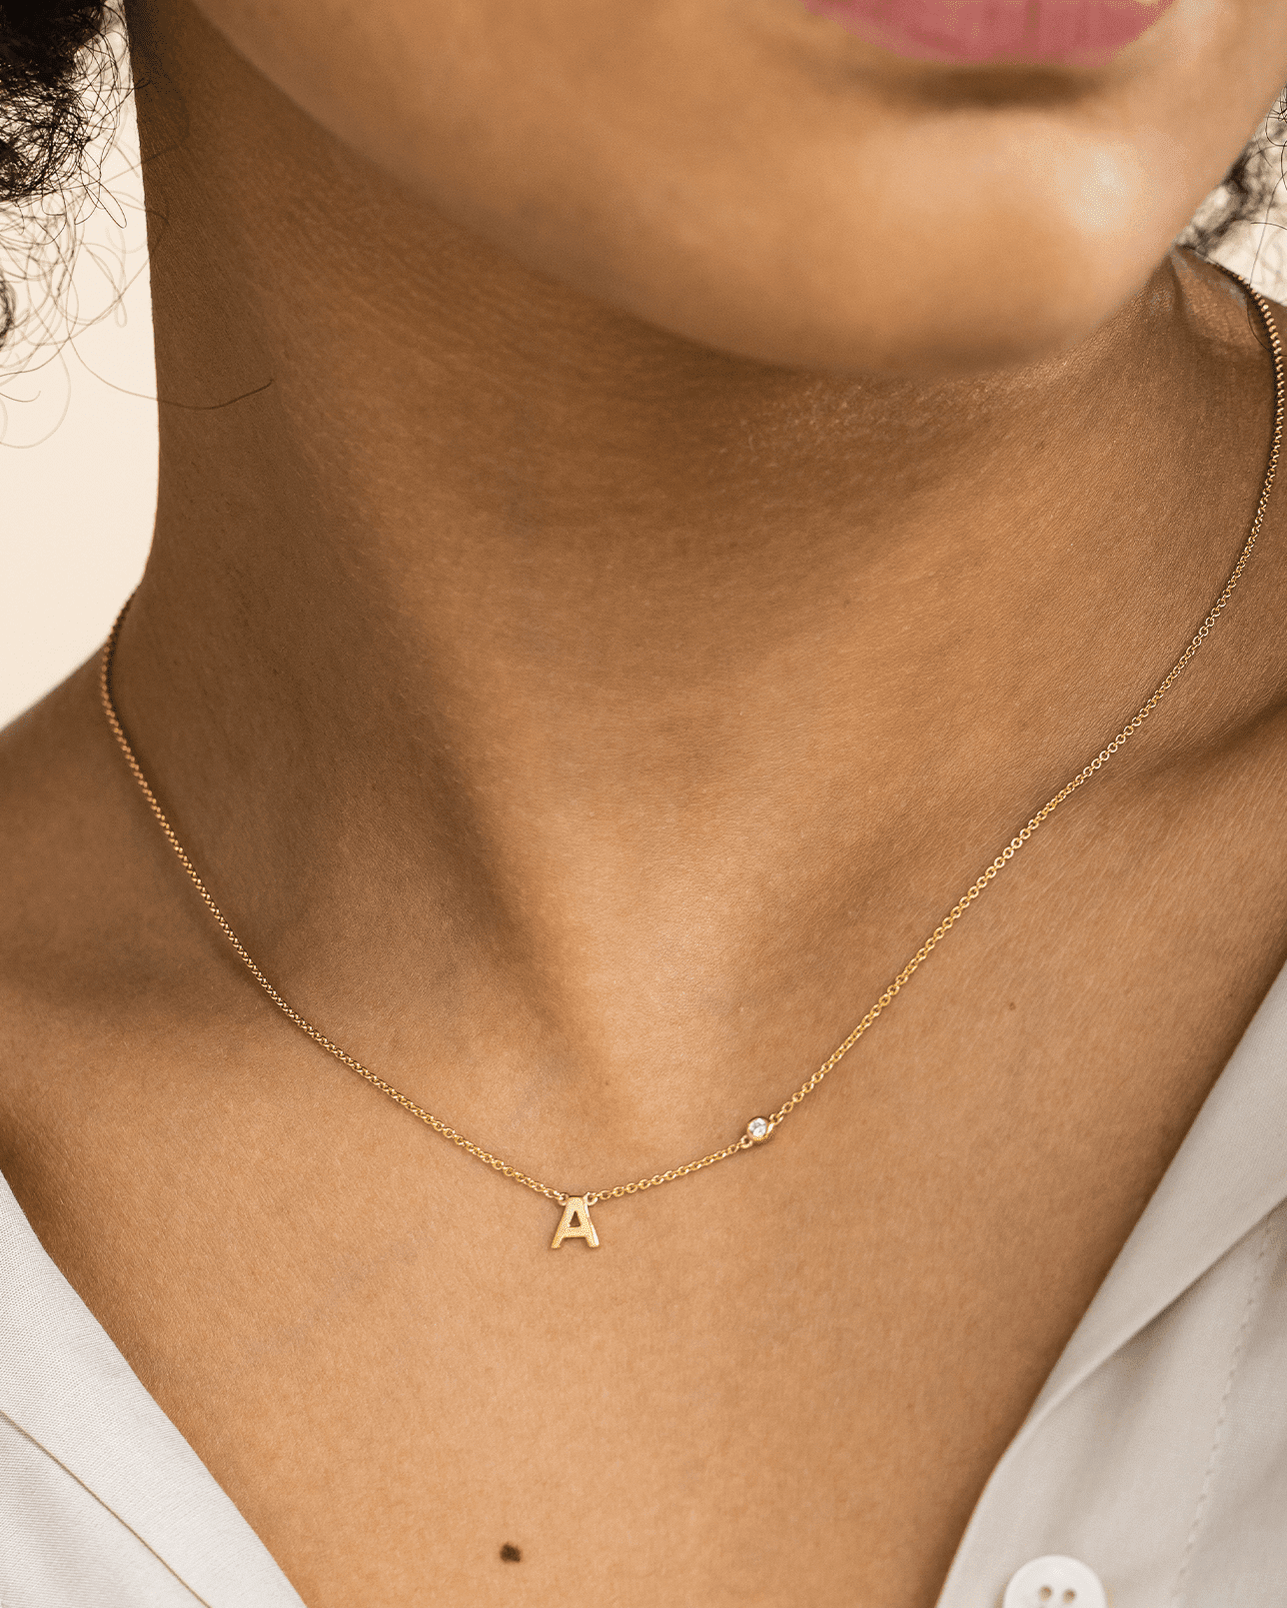 Initial Necklace with Diamonds - 18K Rose Vermeil Necklaces magal-dev 